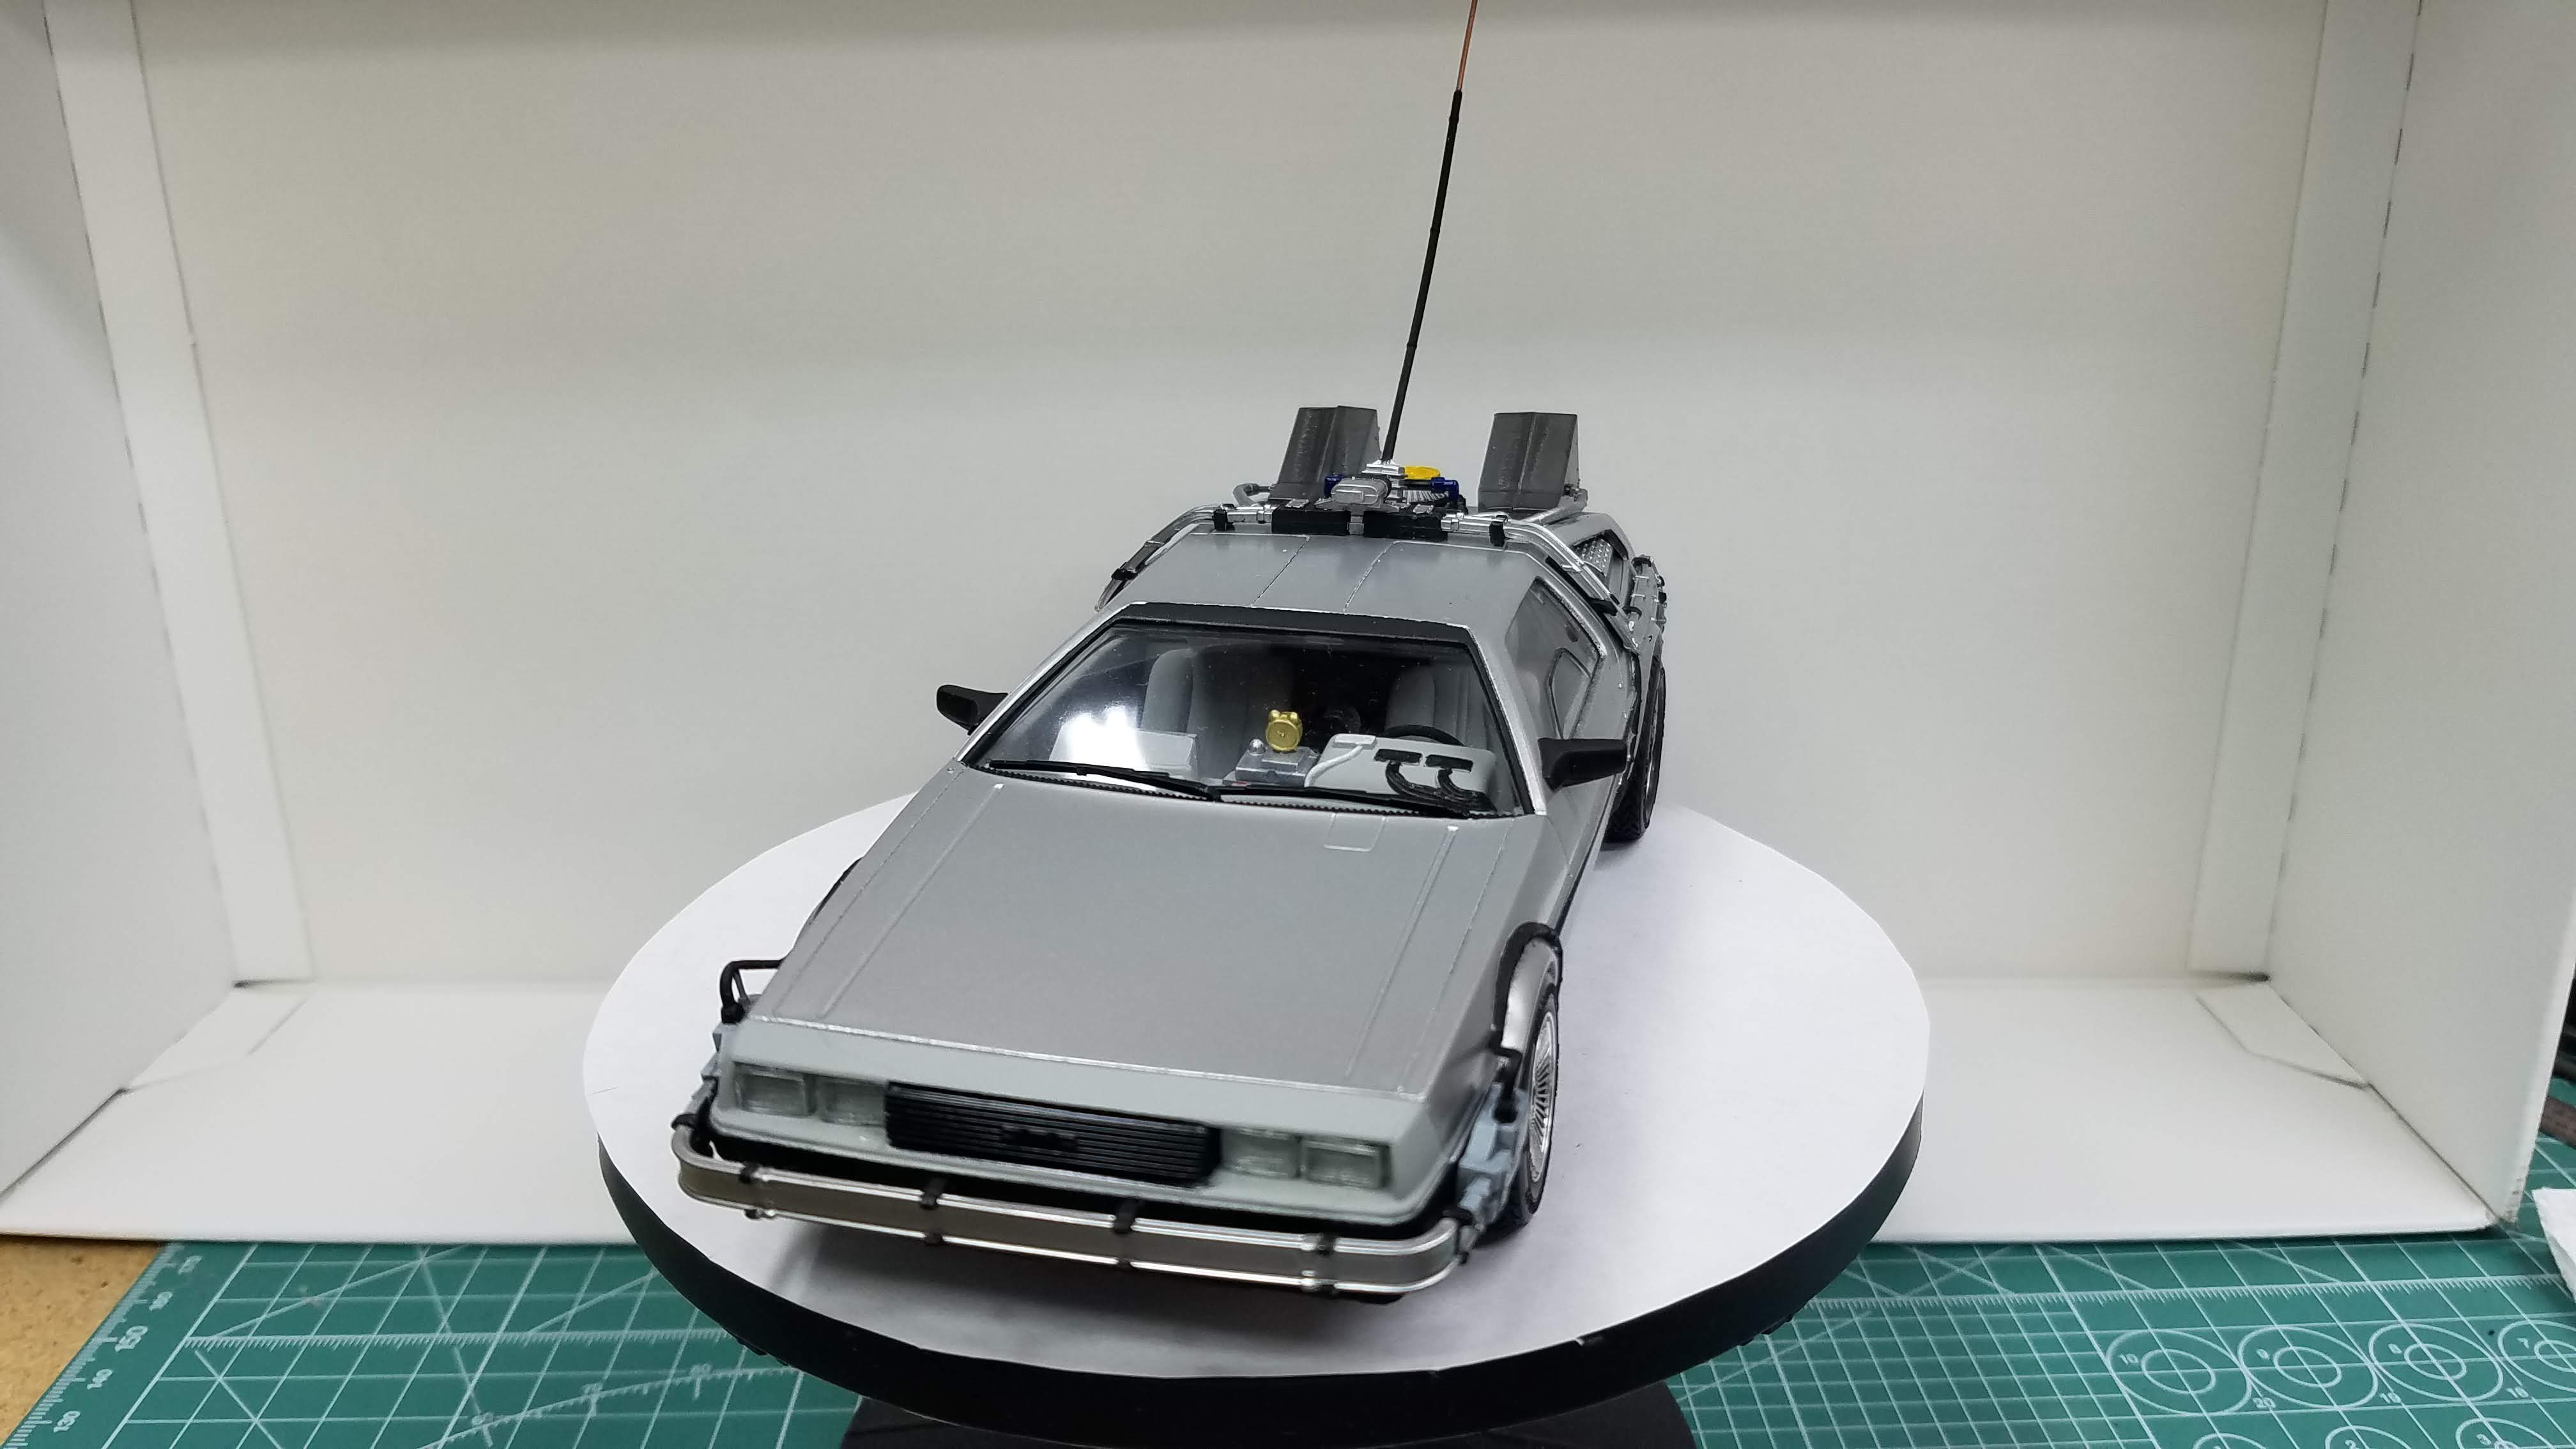 Finished model from front